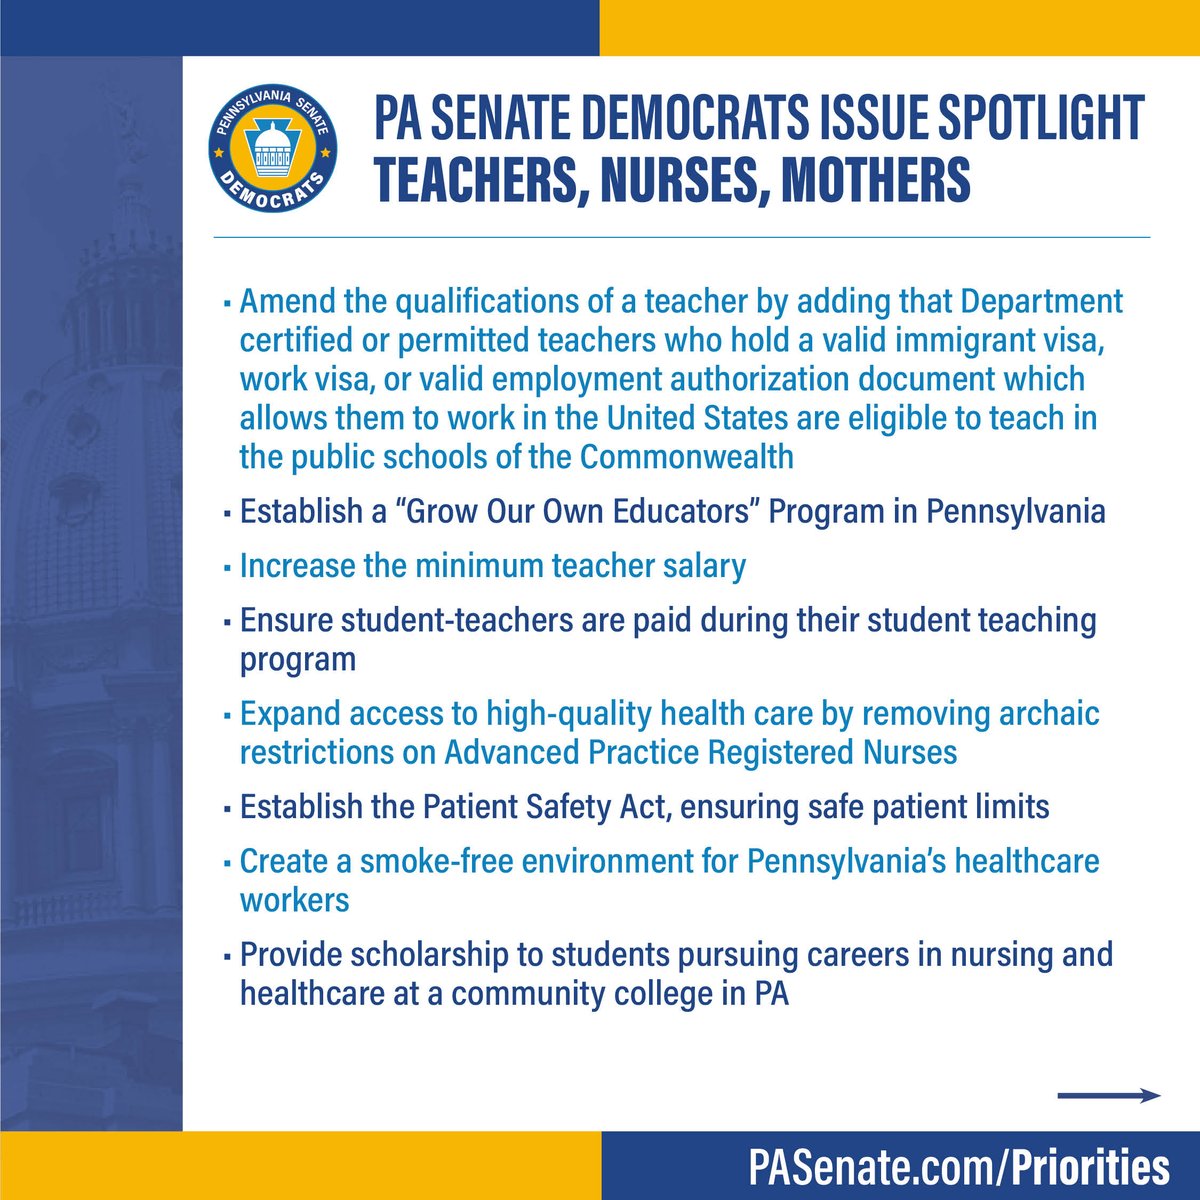 Read all about the legislation we've introduced during the 2023-2024 session to address issues teachers, nurses and mothers face in Pennsylvania. Learn more about what we're doing to help at PASenate.com/Priorities